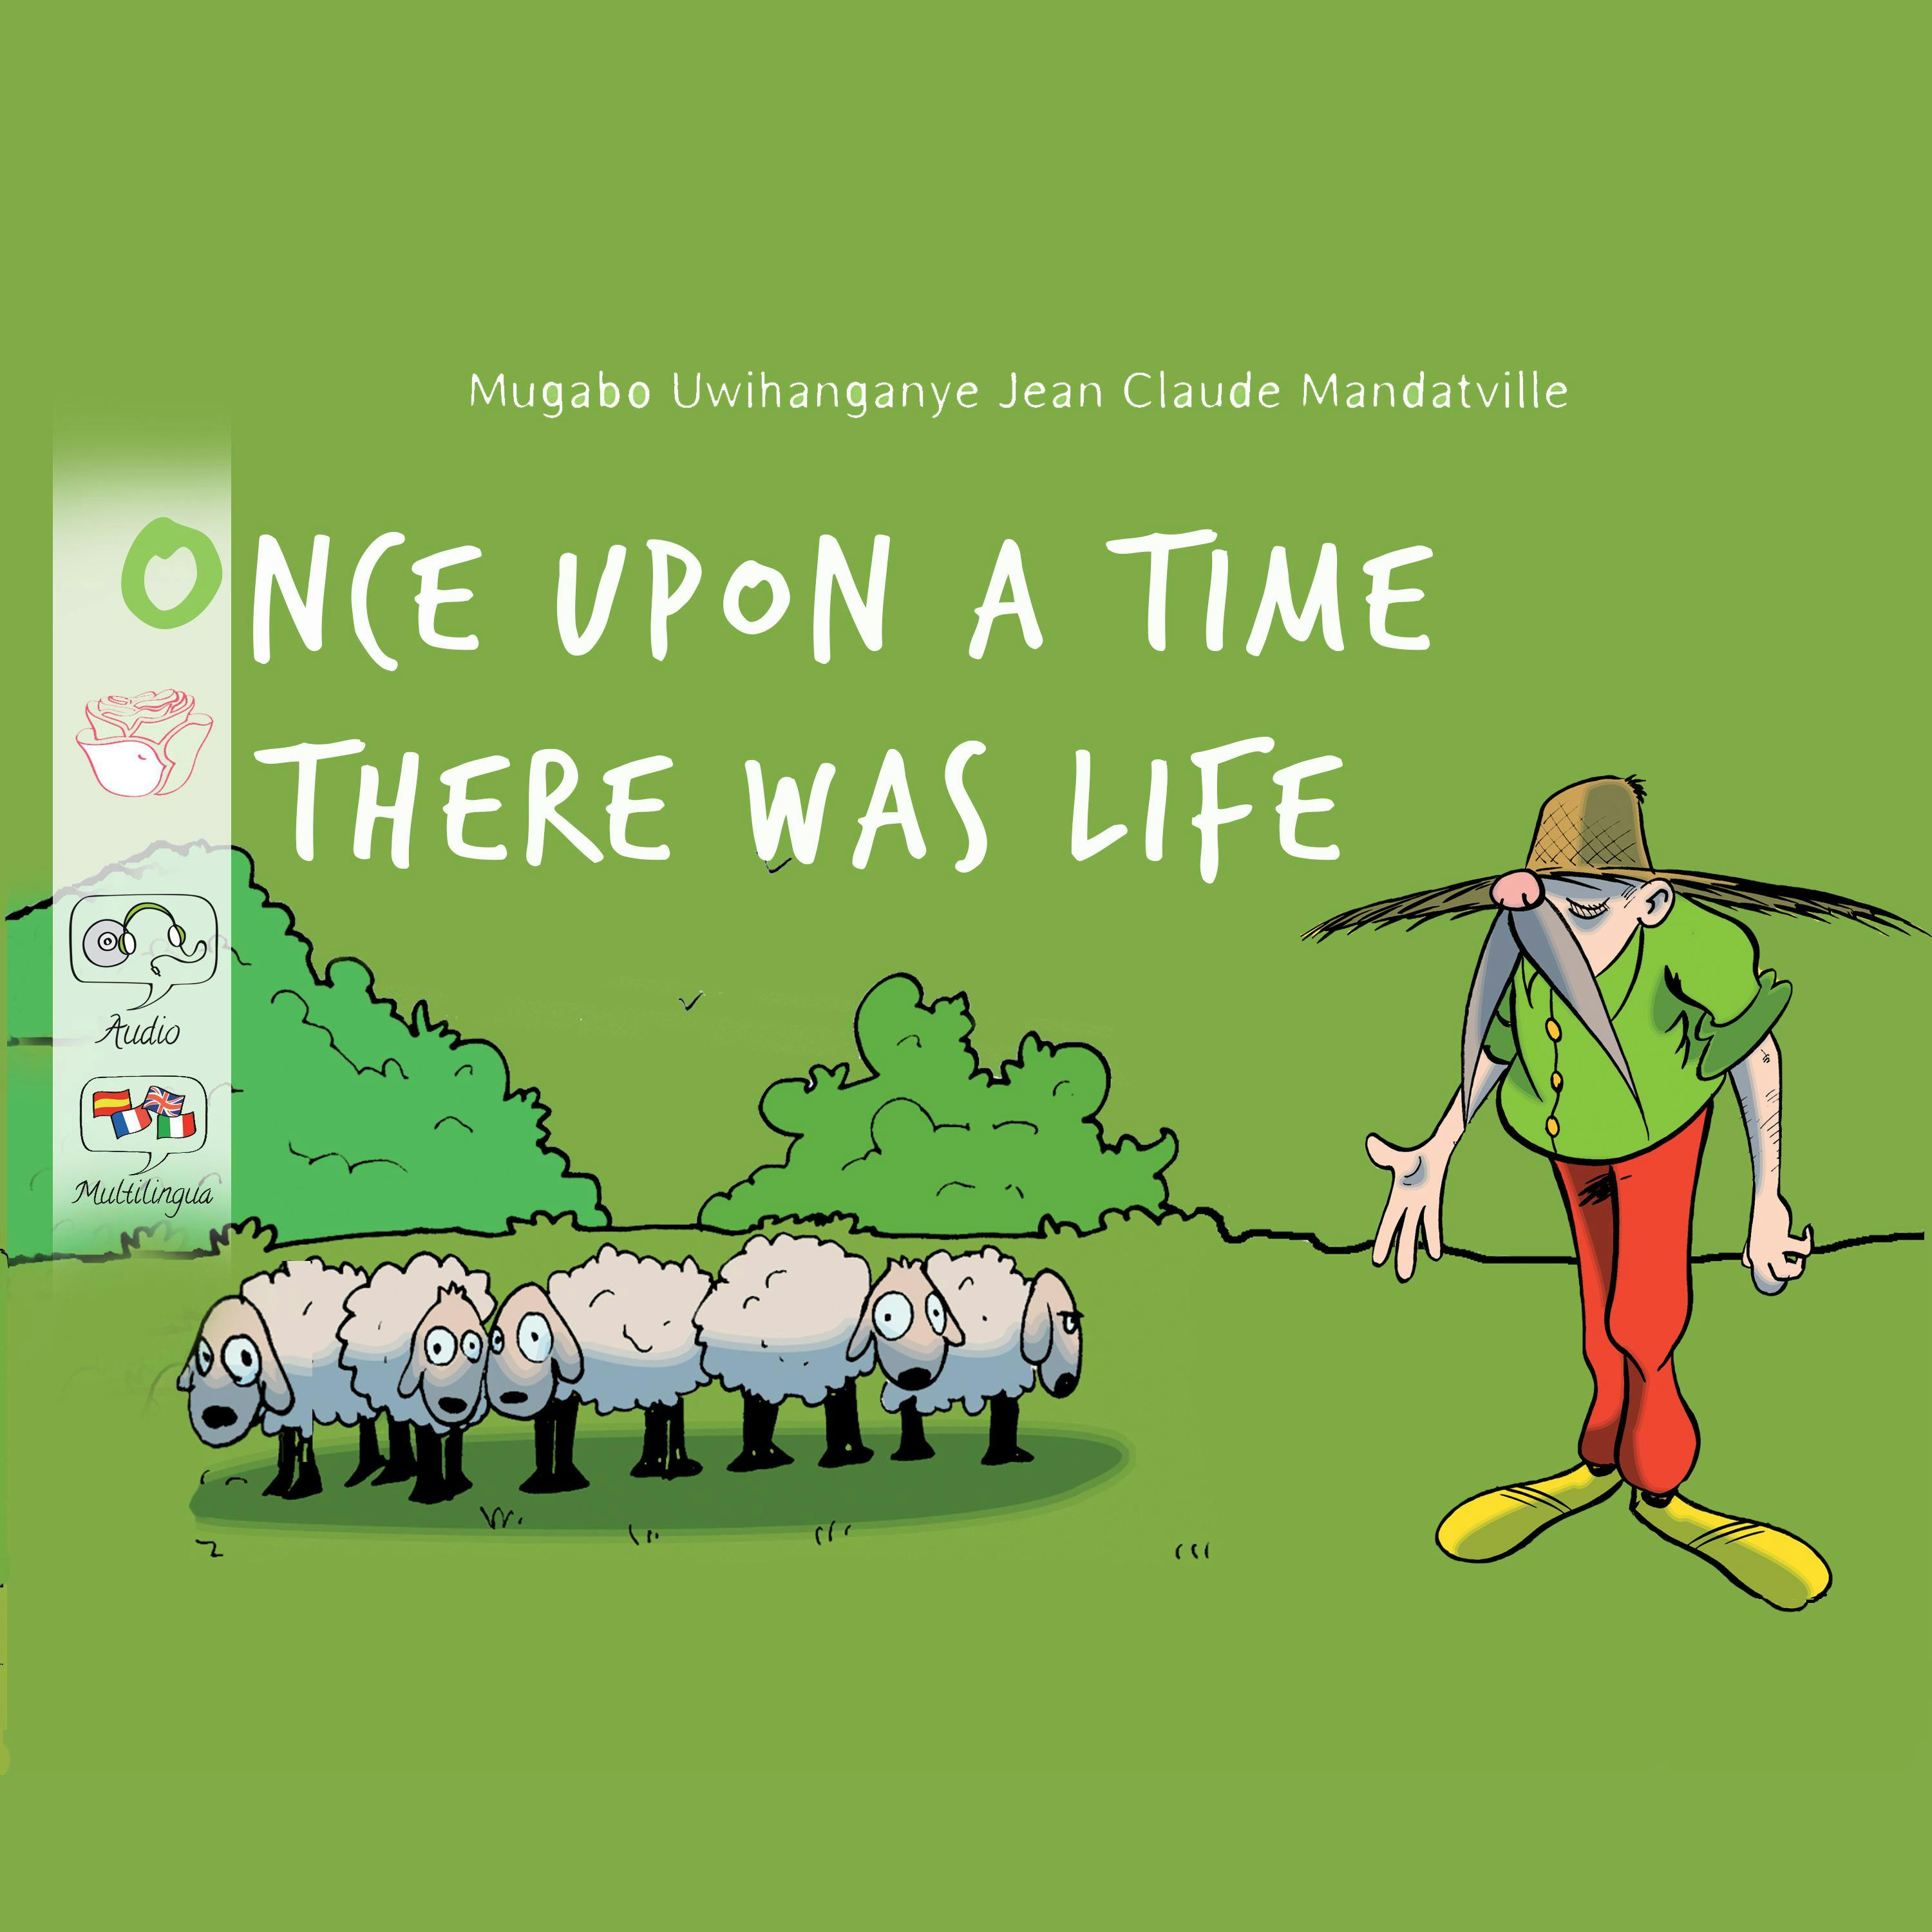 Once upon a time there was Life - undefined